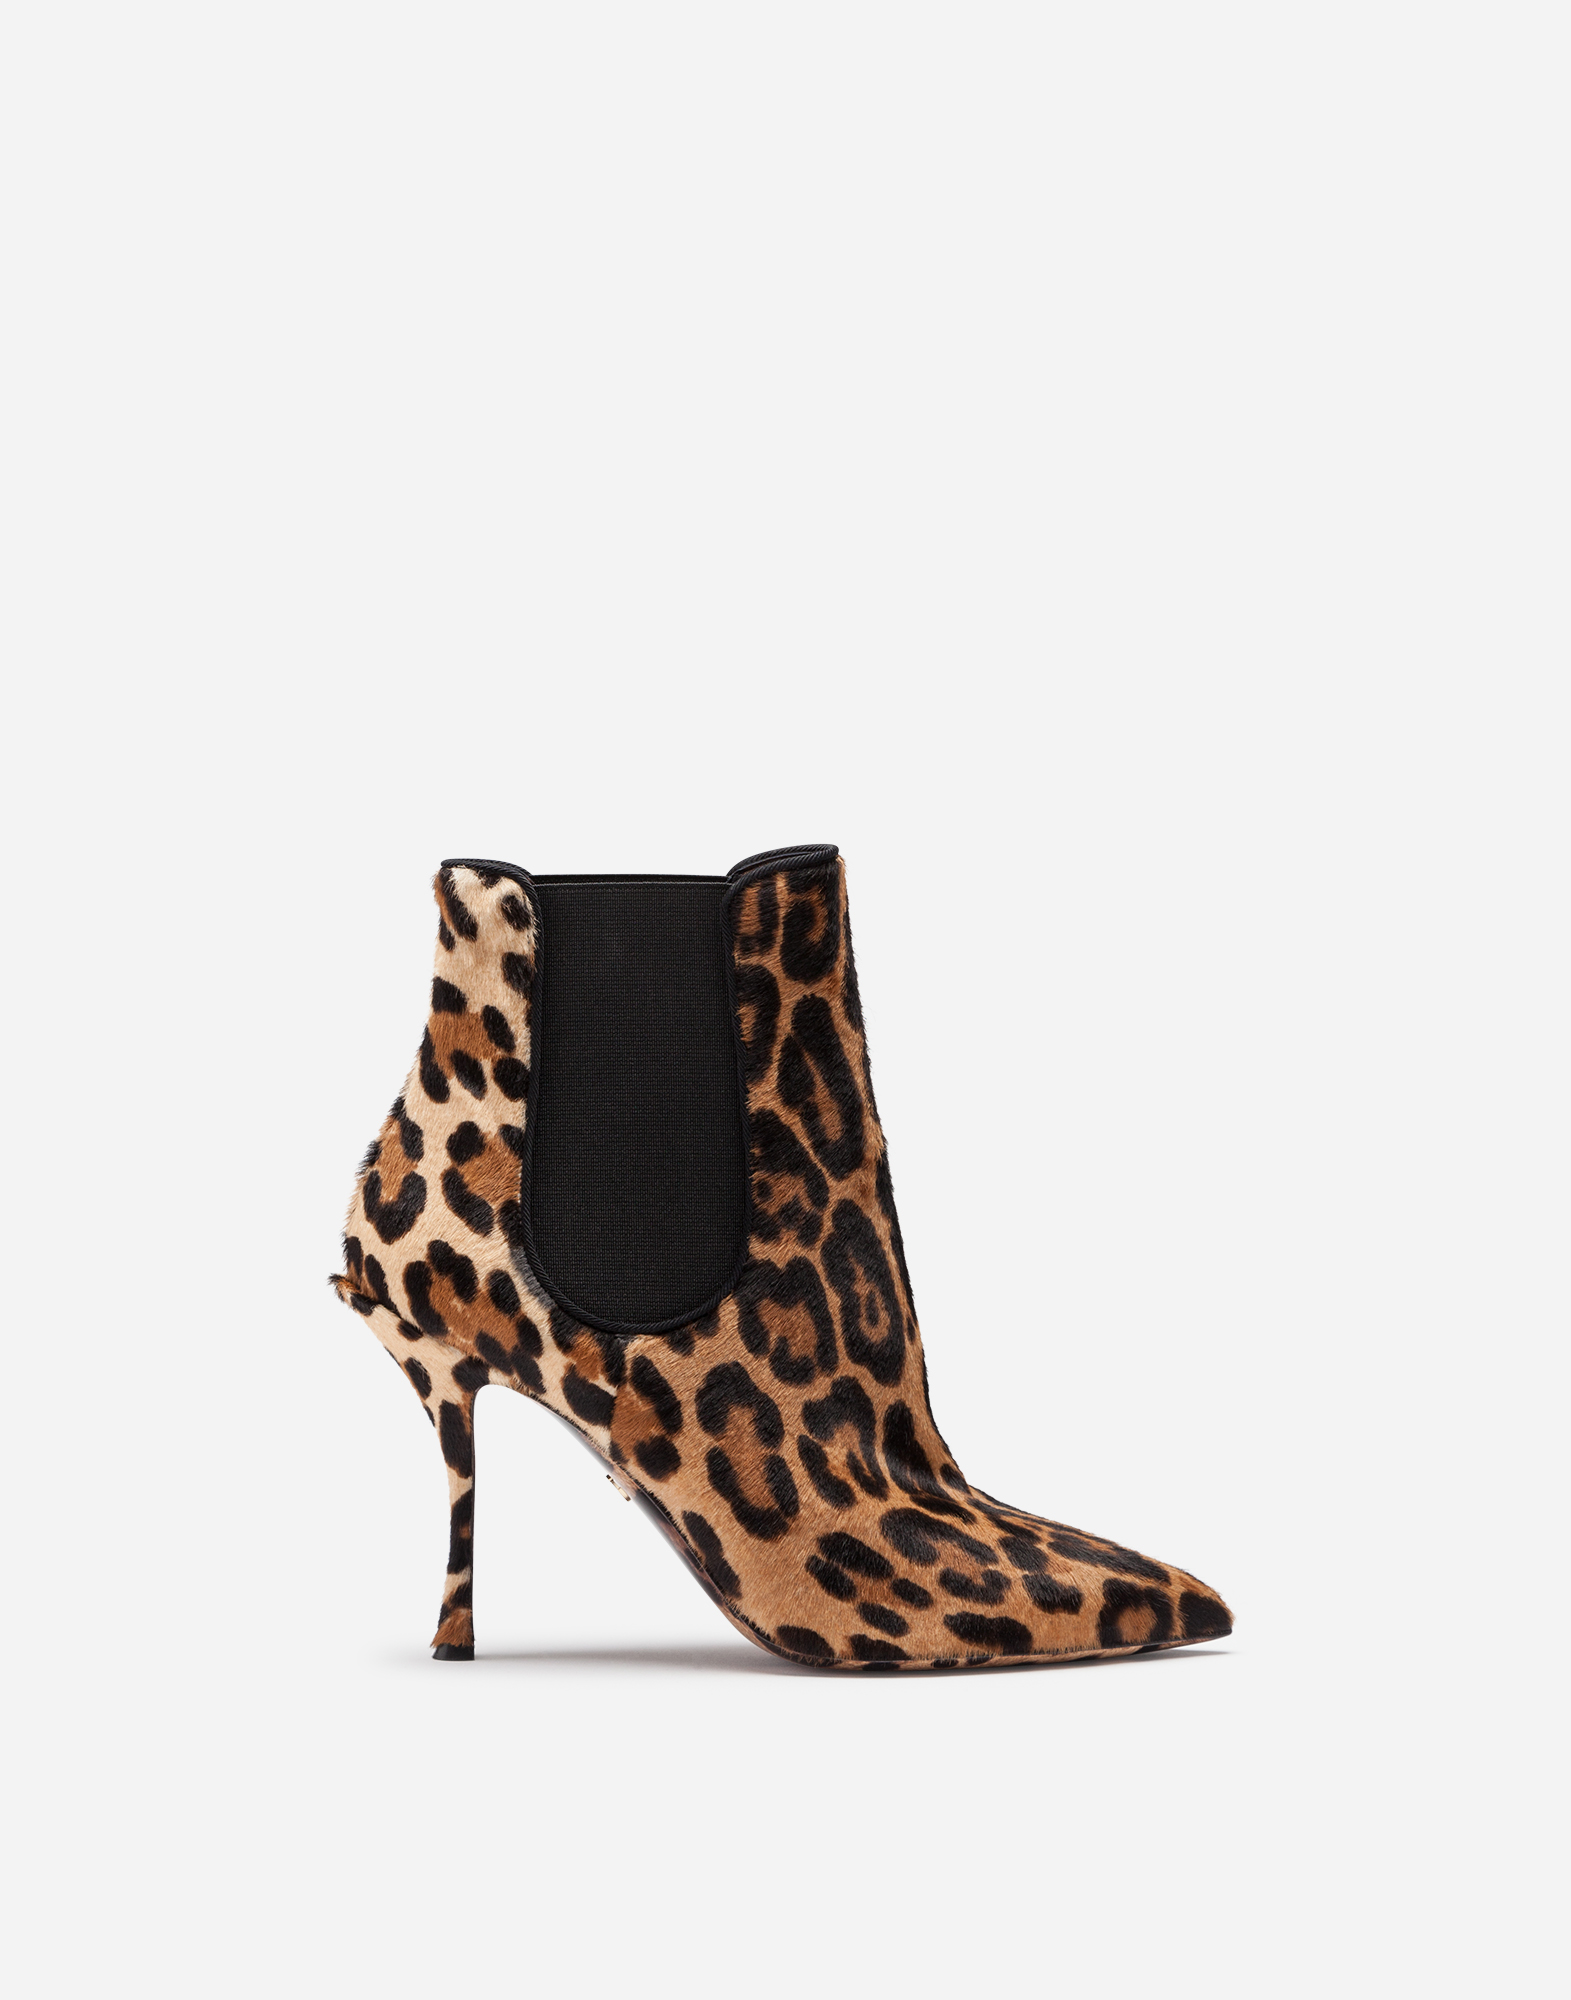 LEOPARD-PRINT PONY HAIR ANKLE BOOTS